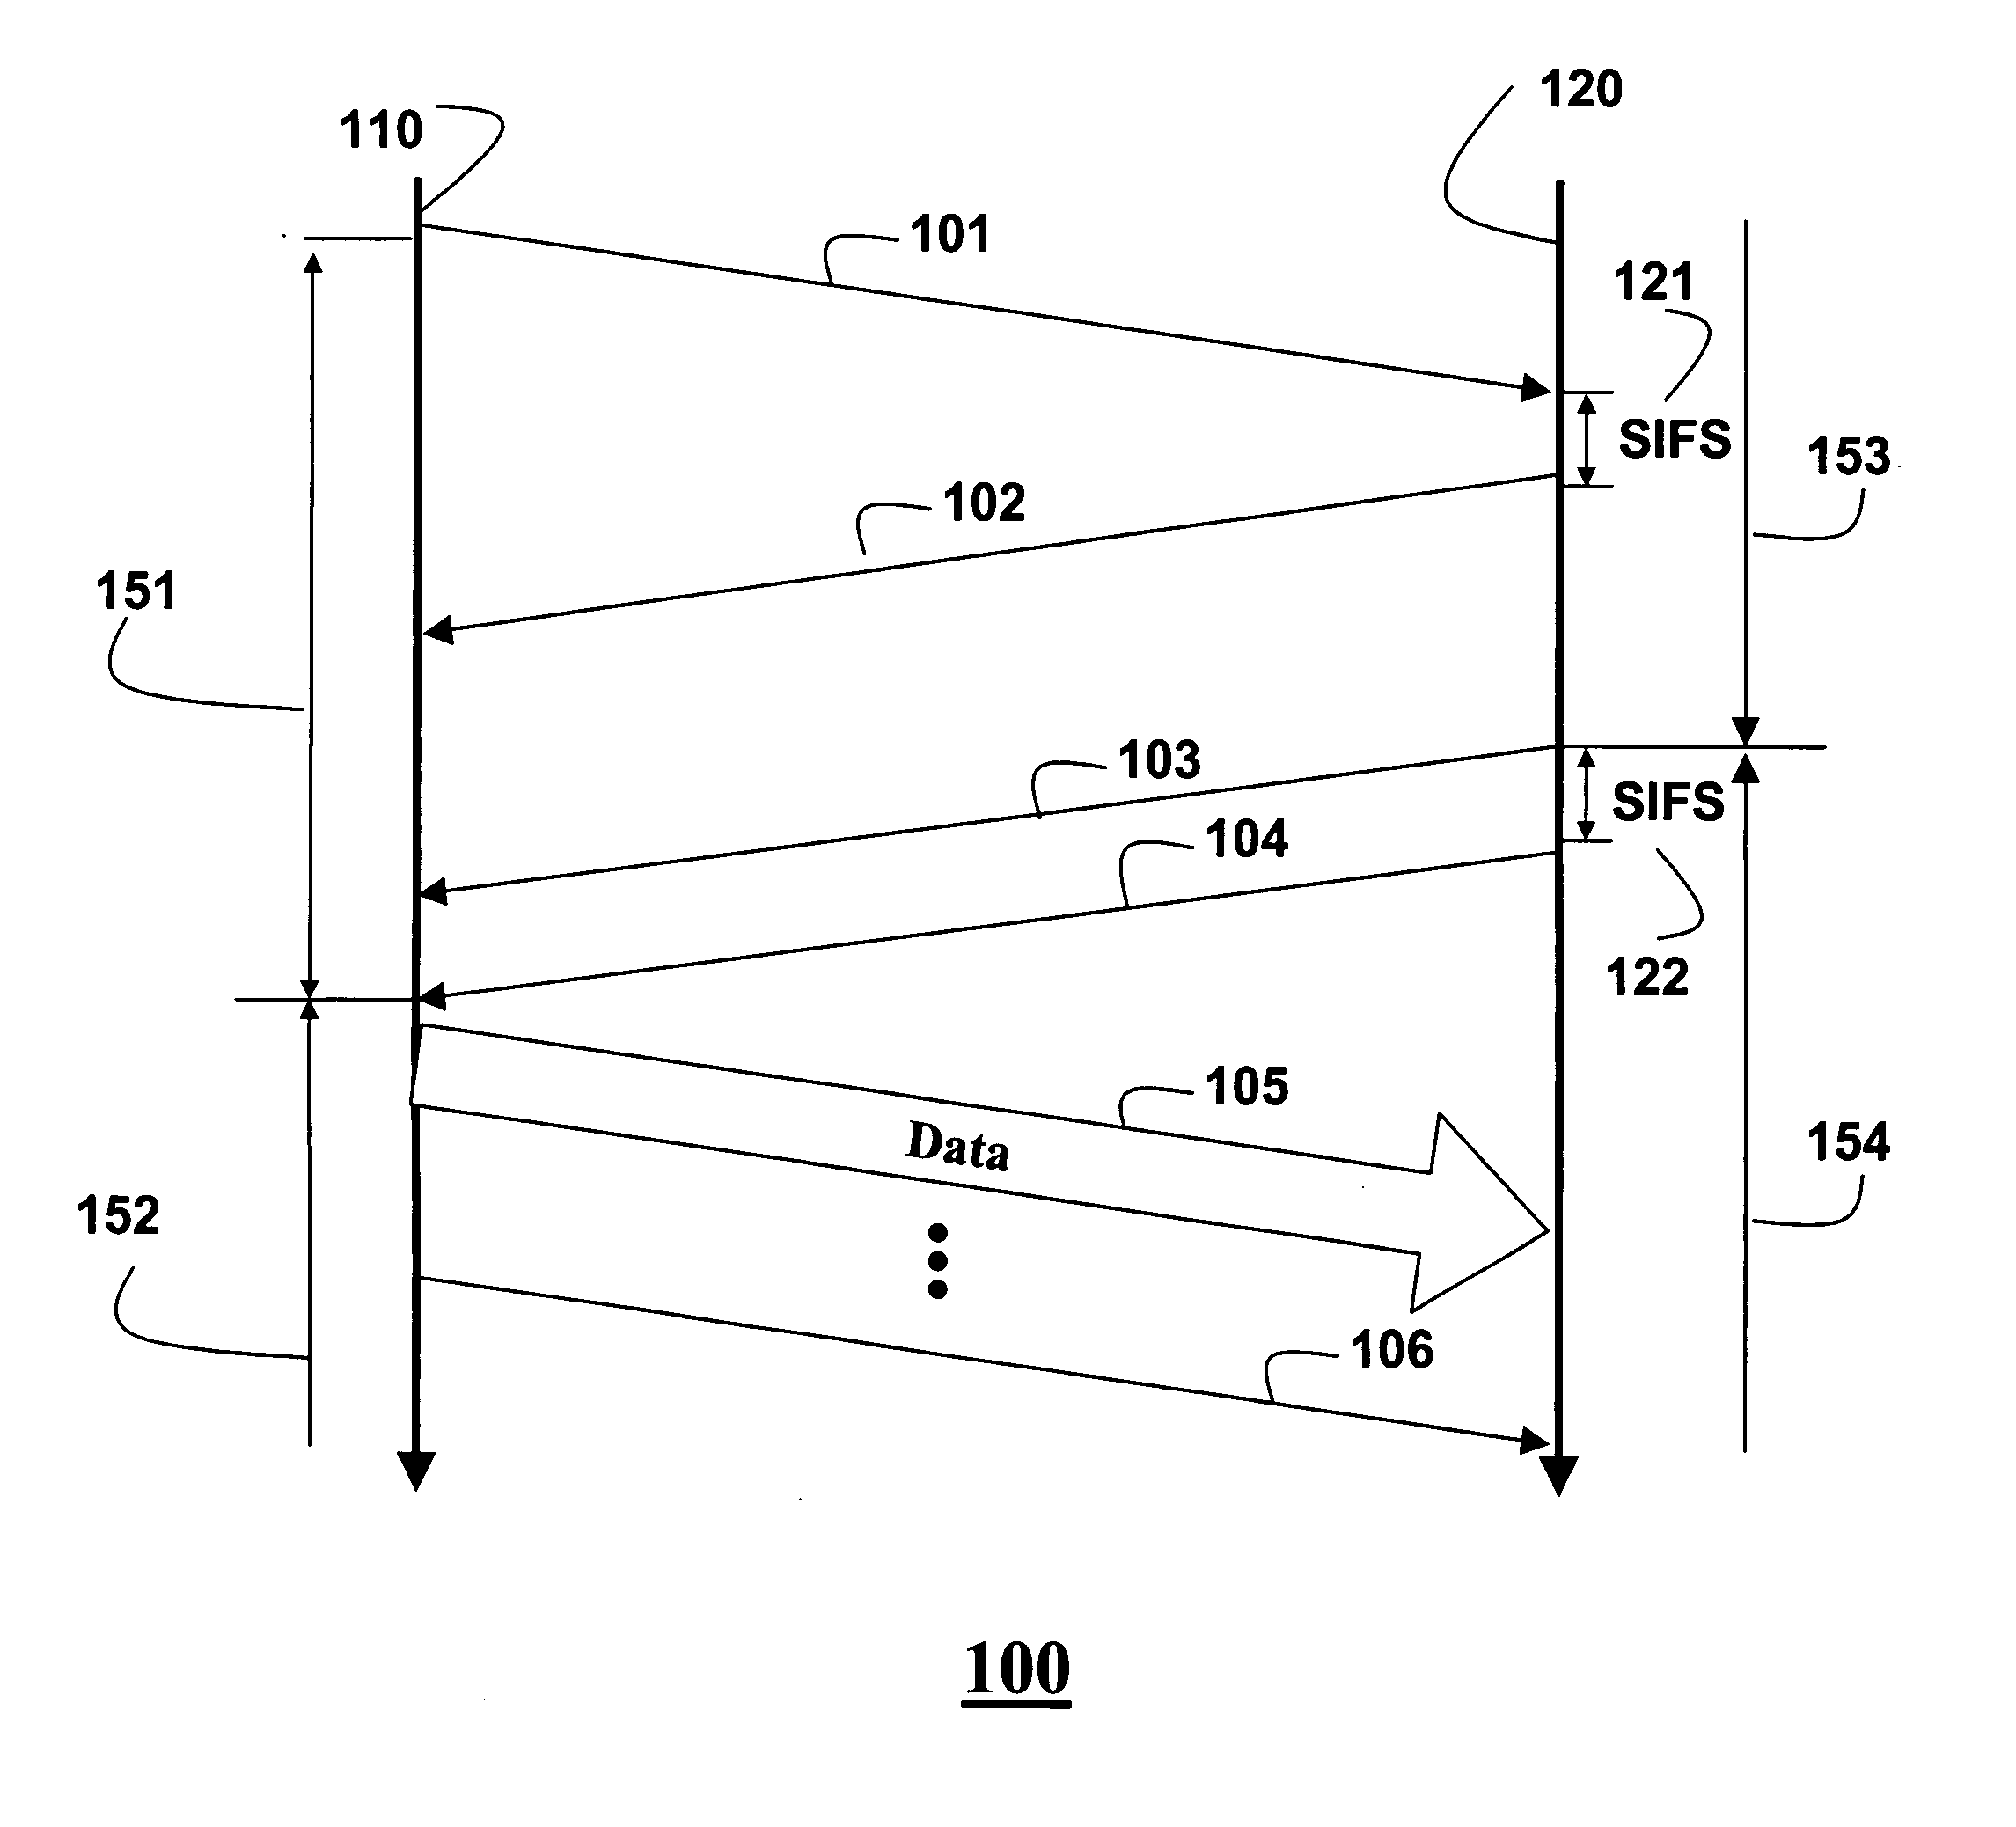 Signaling in a wireless network with sequential coordinated channel access